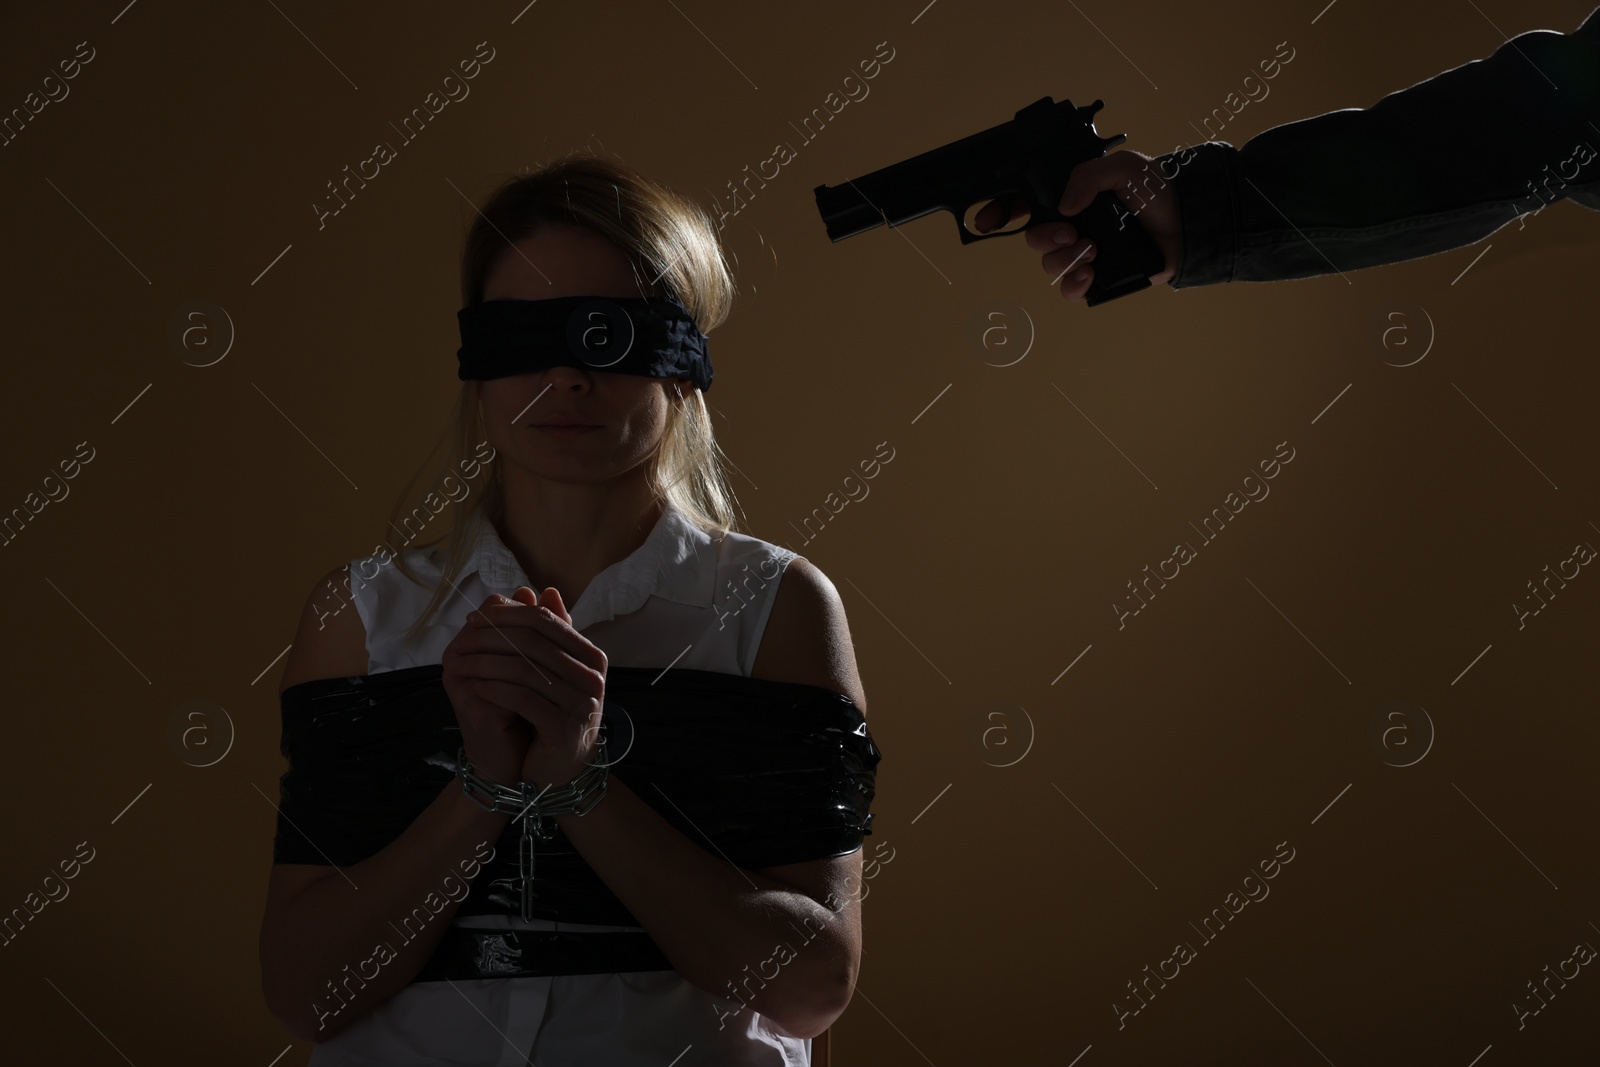 Photo of Kidnapper pointing gun at taped up and blindfolded woman taken as hostage on dark background